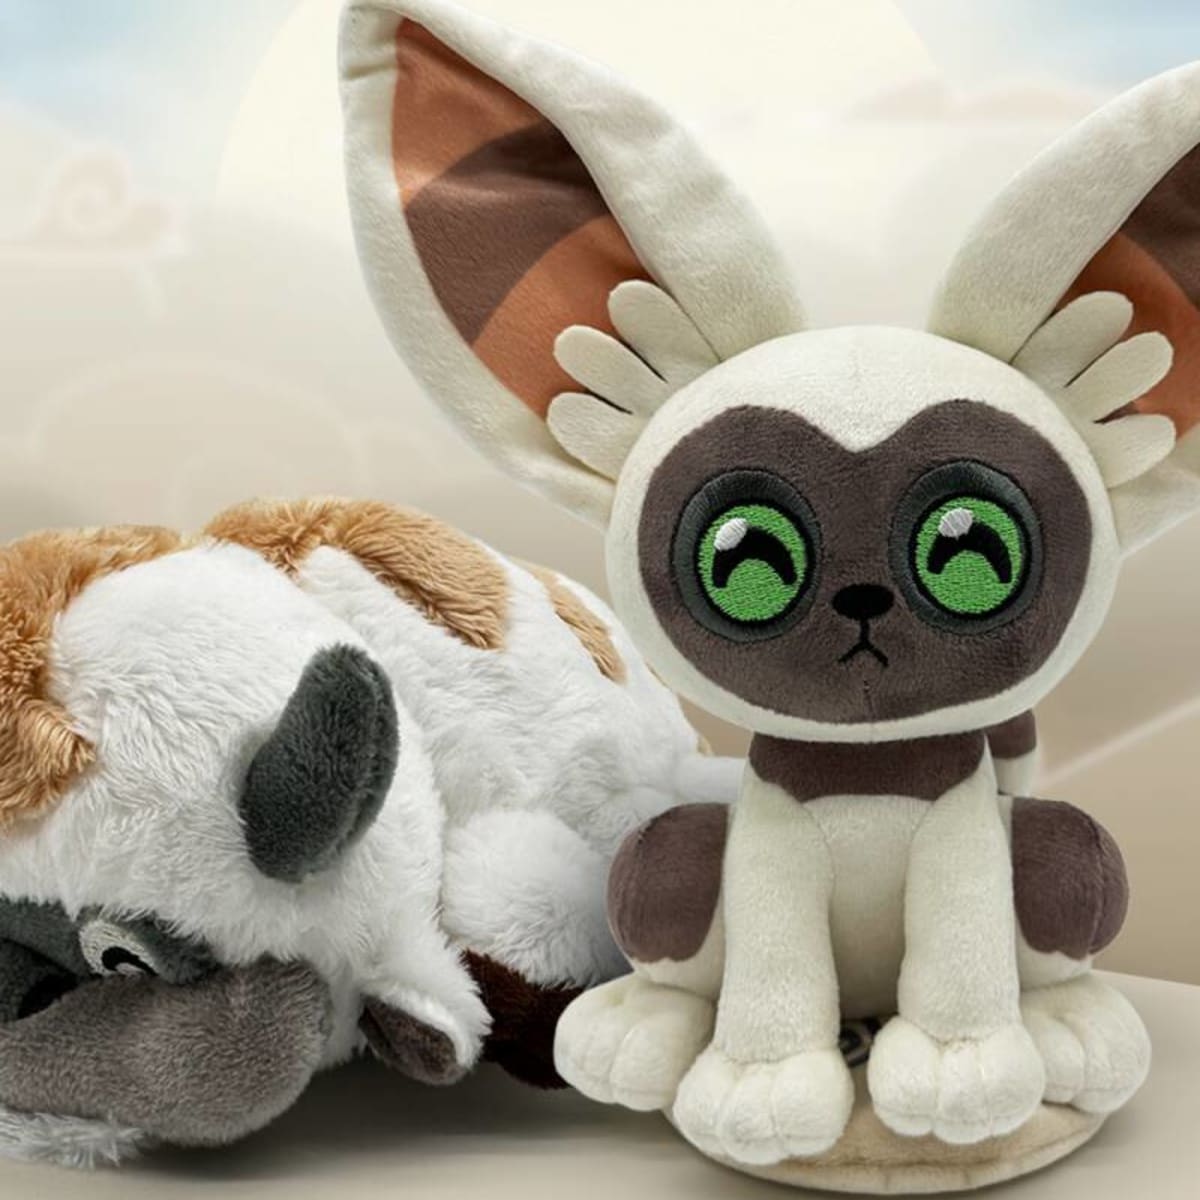 Appa and Momo Star in Fuzzy Youtooz AVATAR: THE LAST 